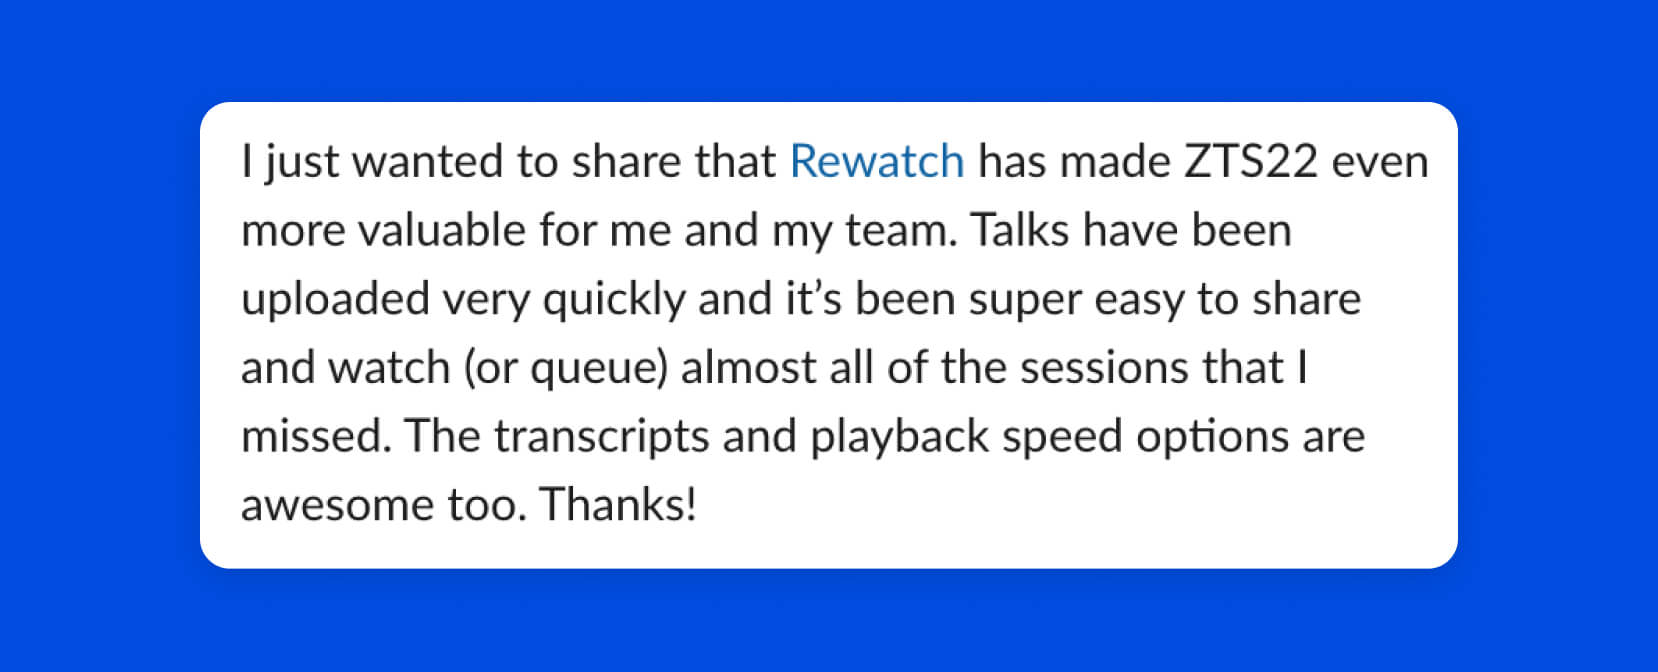 Engineering manager at Zendesk shares his enthusiasm for Rewatch